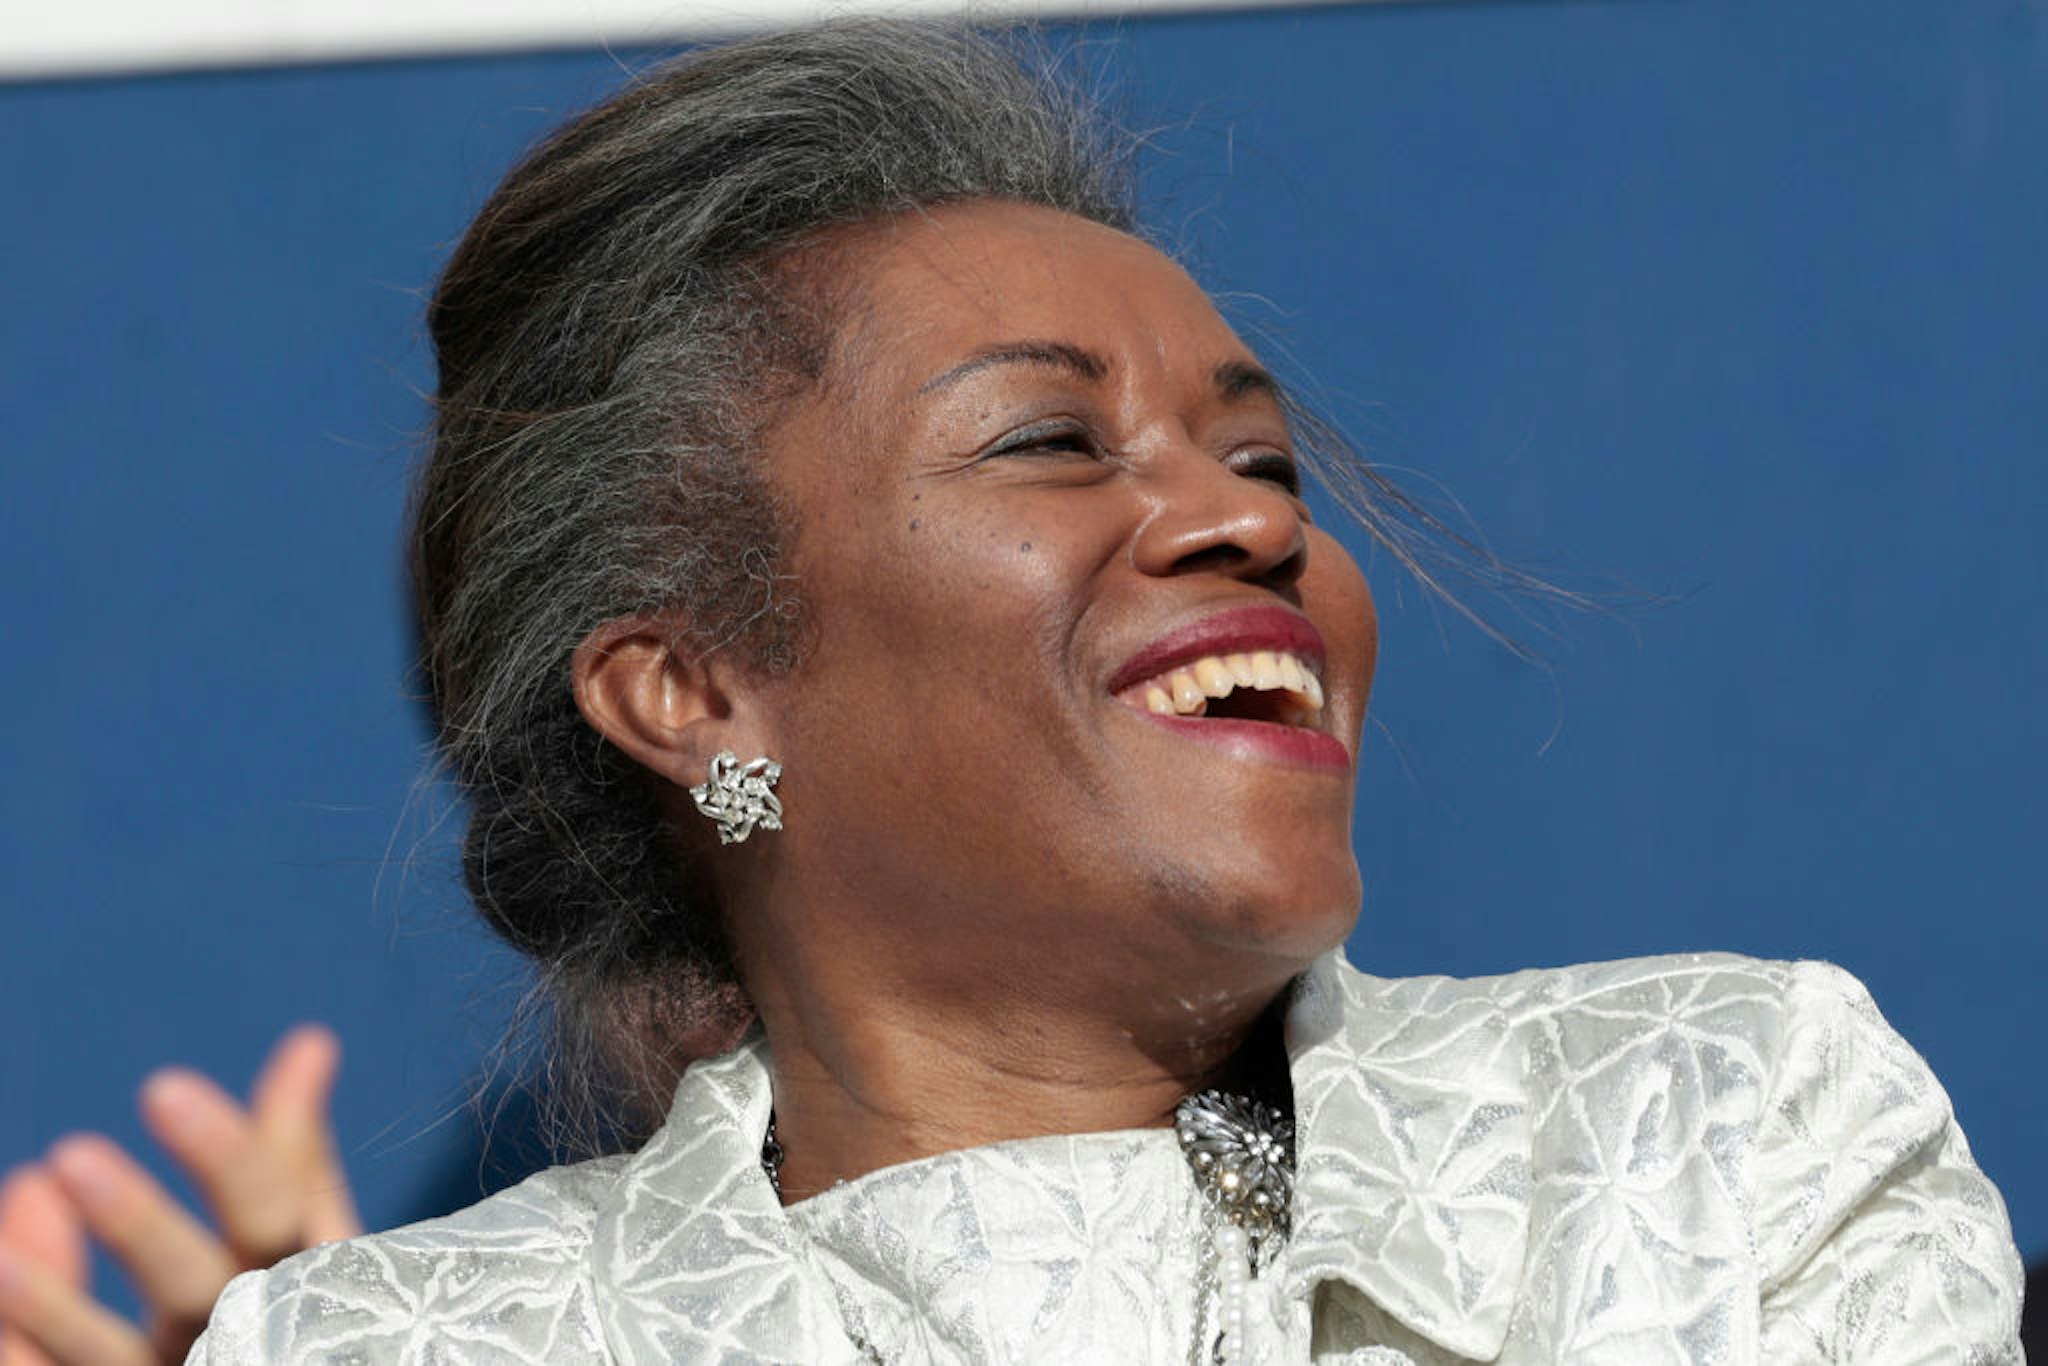 RICHMOND, VIRGINIA - JANUARY 15: Lieutenant Governor of Virginia Winsome Sears smiles during the 74th Inauguration Ceremonies on the steps of the Virginia State Capitol on January 15, 2022 in Richmond, Virginia. Sears is the first woman as well as the first woman of color to serve as Lieutenant Governor in Virginia’s history. (Photo by Anna Moneymaker/Getty Images)